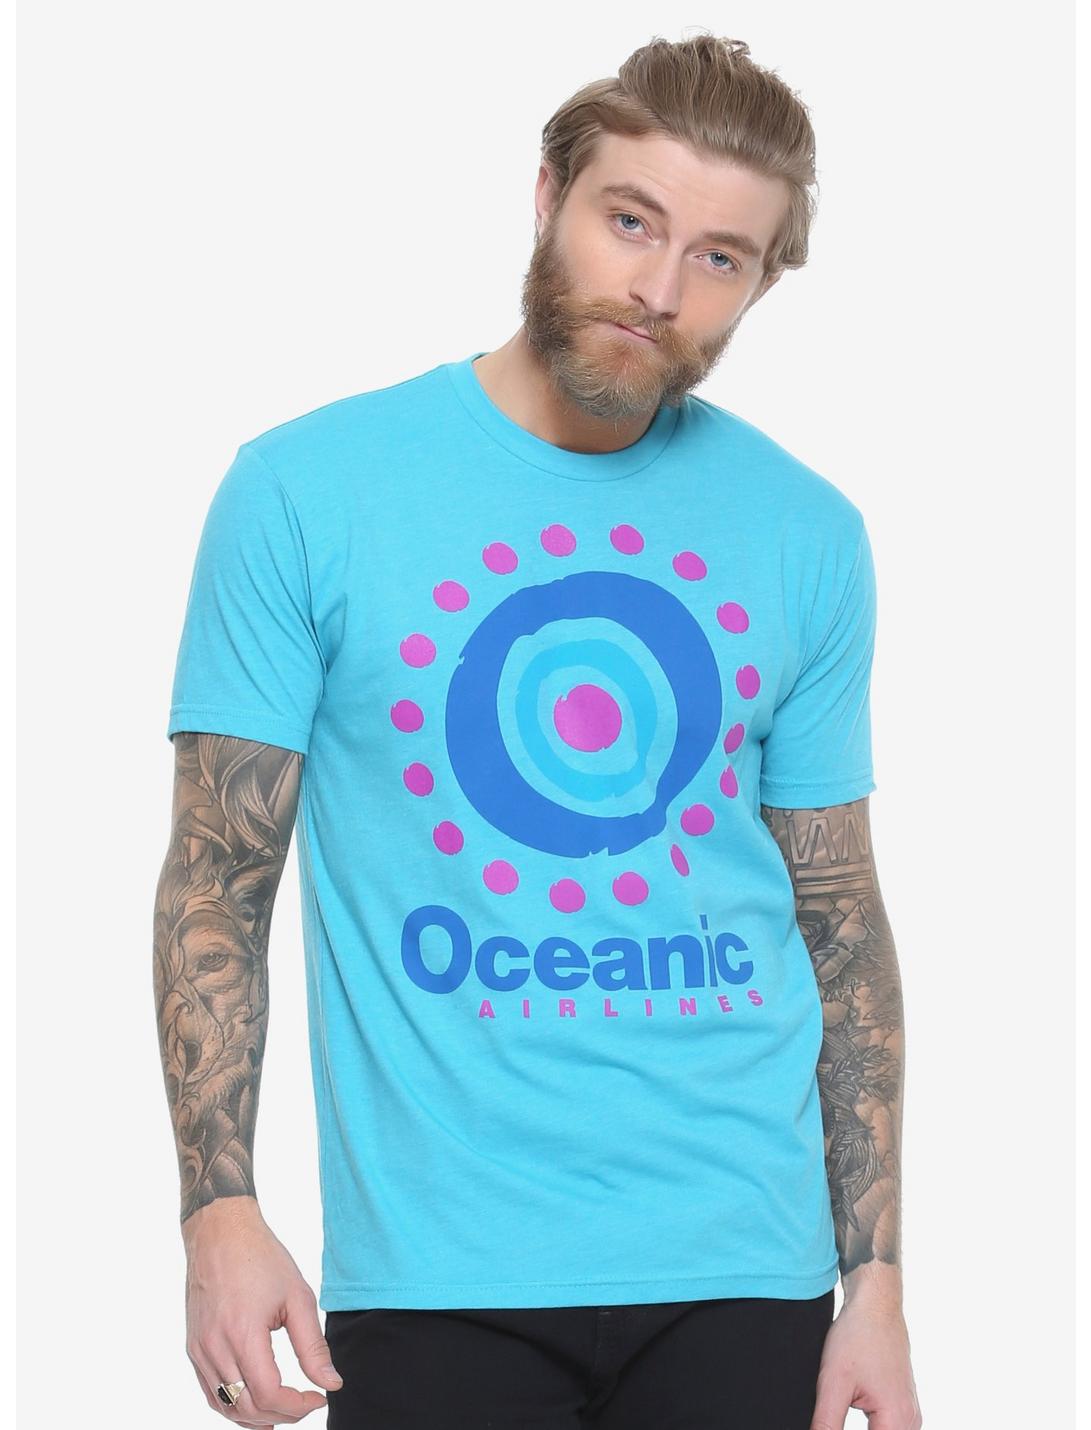 Lost Oceanic Airlines T-Shirt - BoxLunch Exclusive, BLUE, hi-res